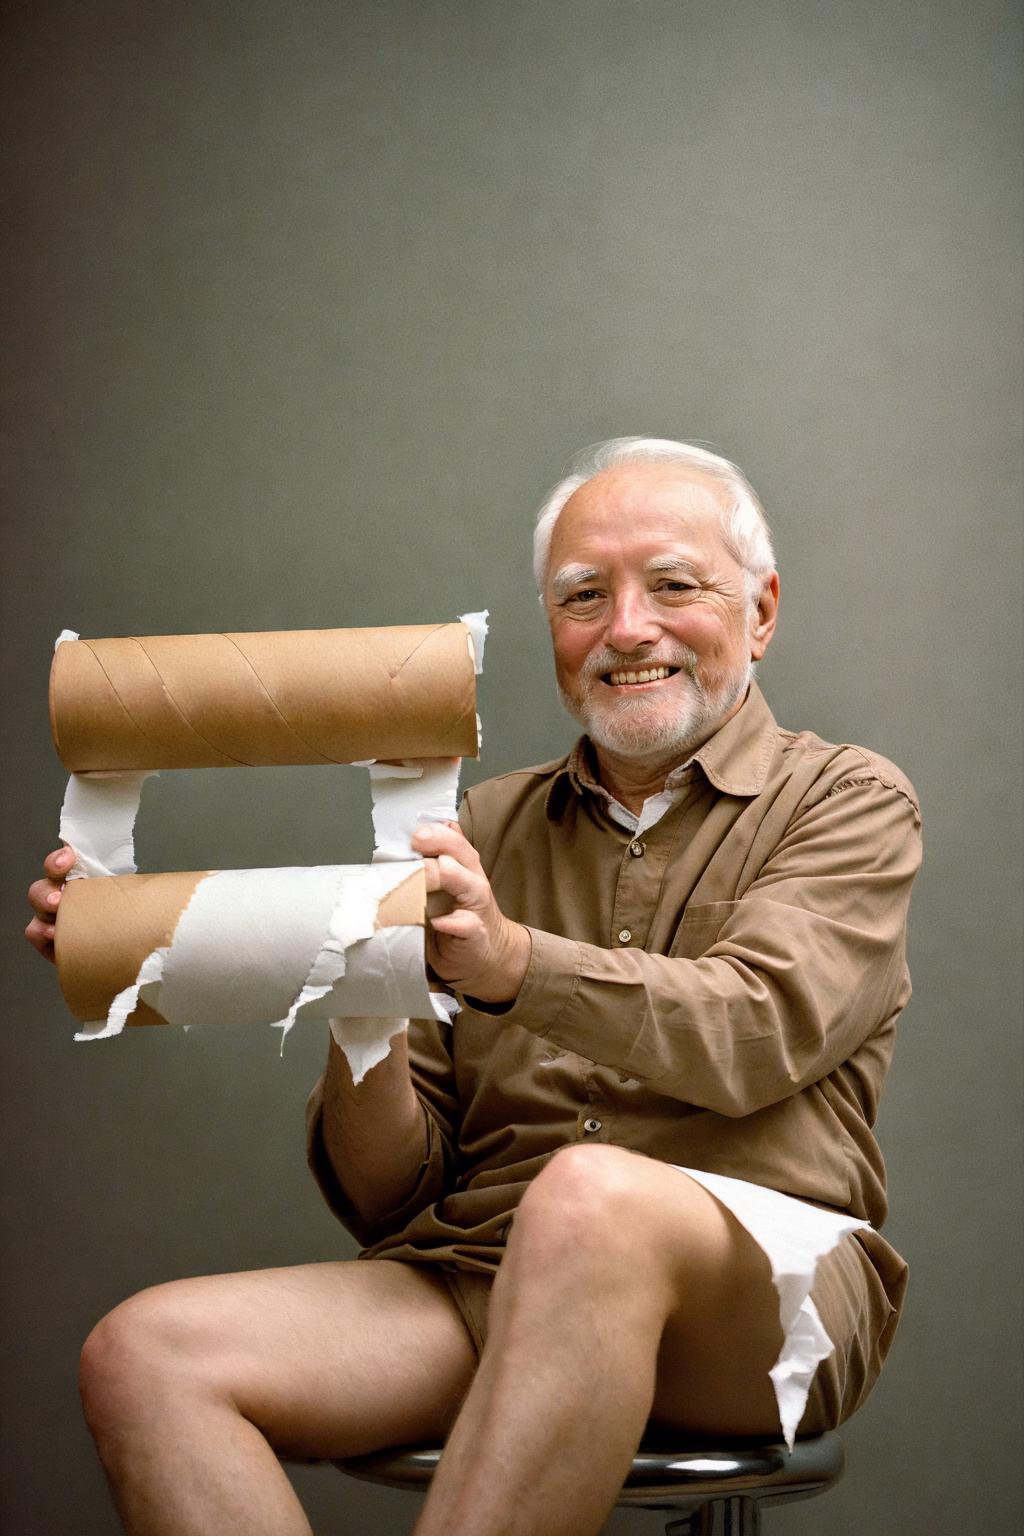 empty toilet paper image by robotfromspace